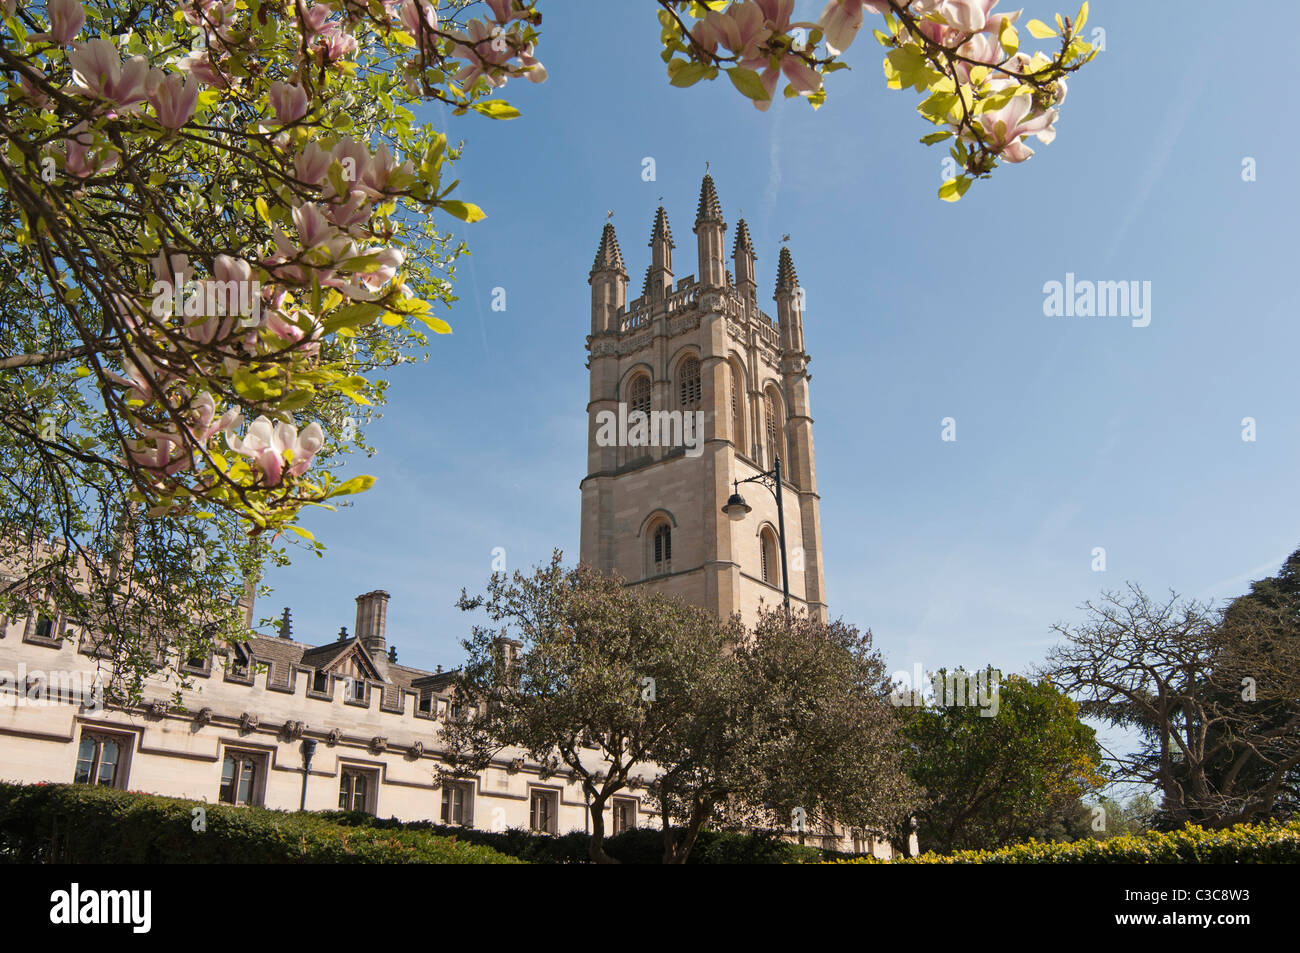 Magdalen College as seen from the south side of the High Street, adjacent to the Botanic Gardens, Oxford, England, UK Stock Photo